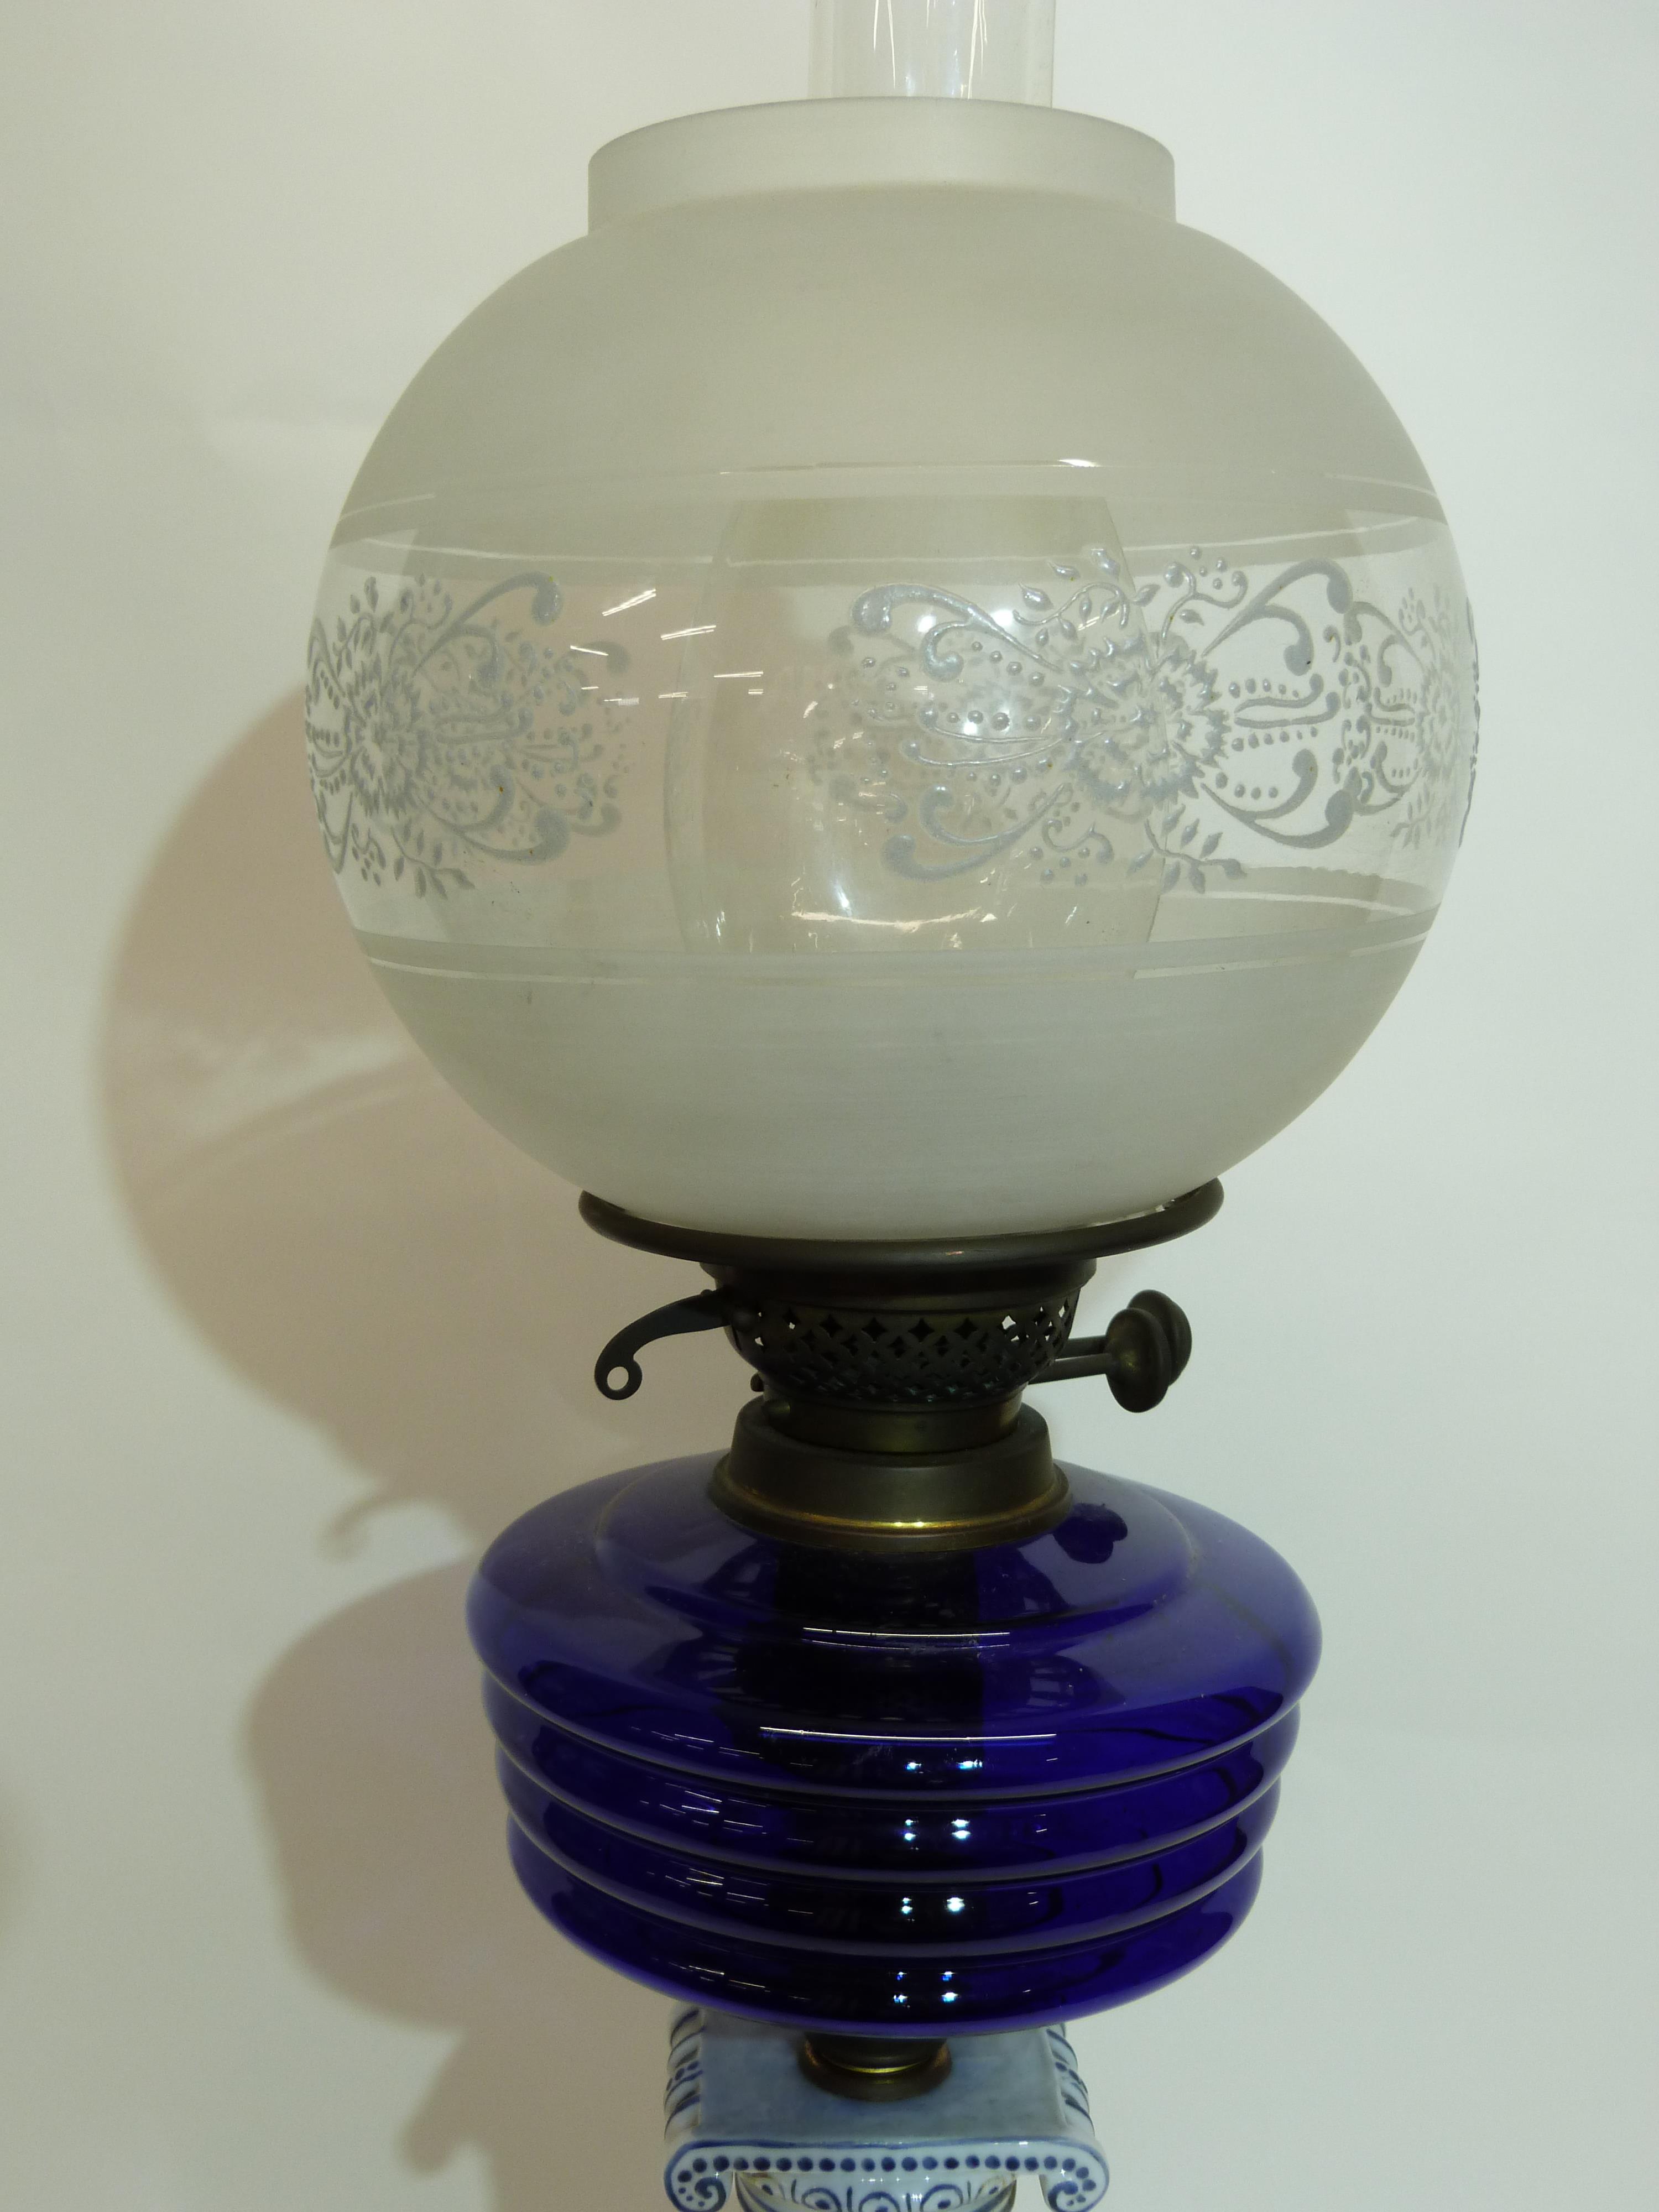 Oil lamp with blue glass reservoir below a white glass floral shade, supported by a porcelain column - Image 3 of 3